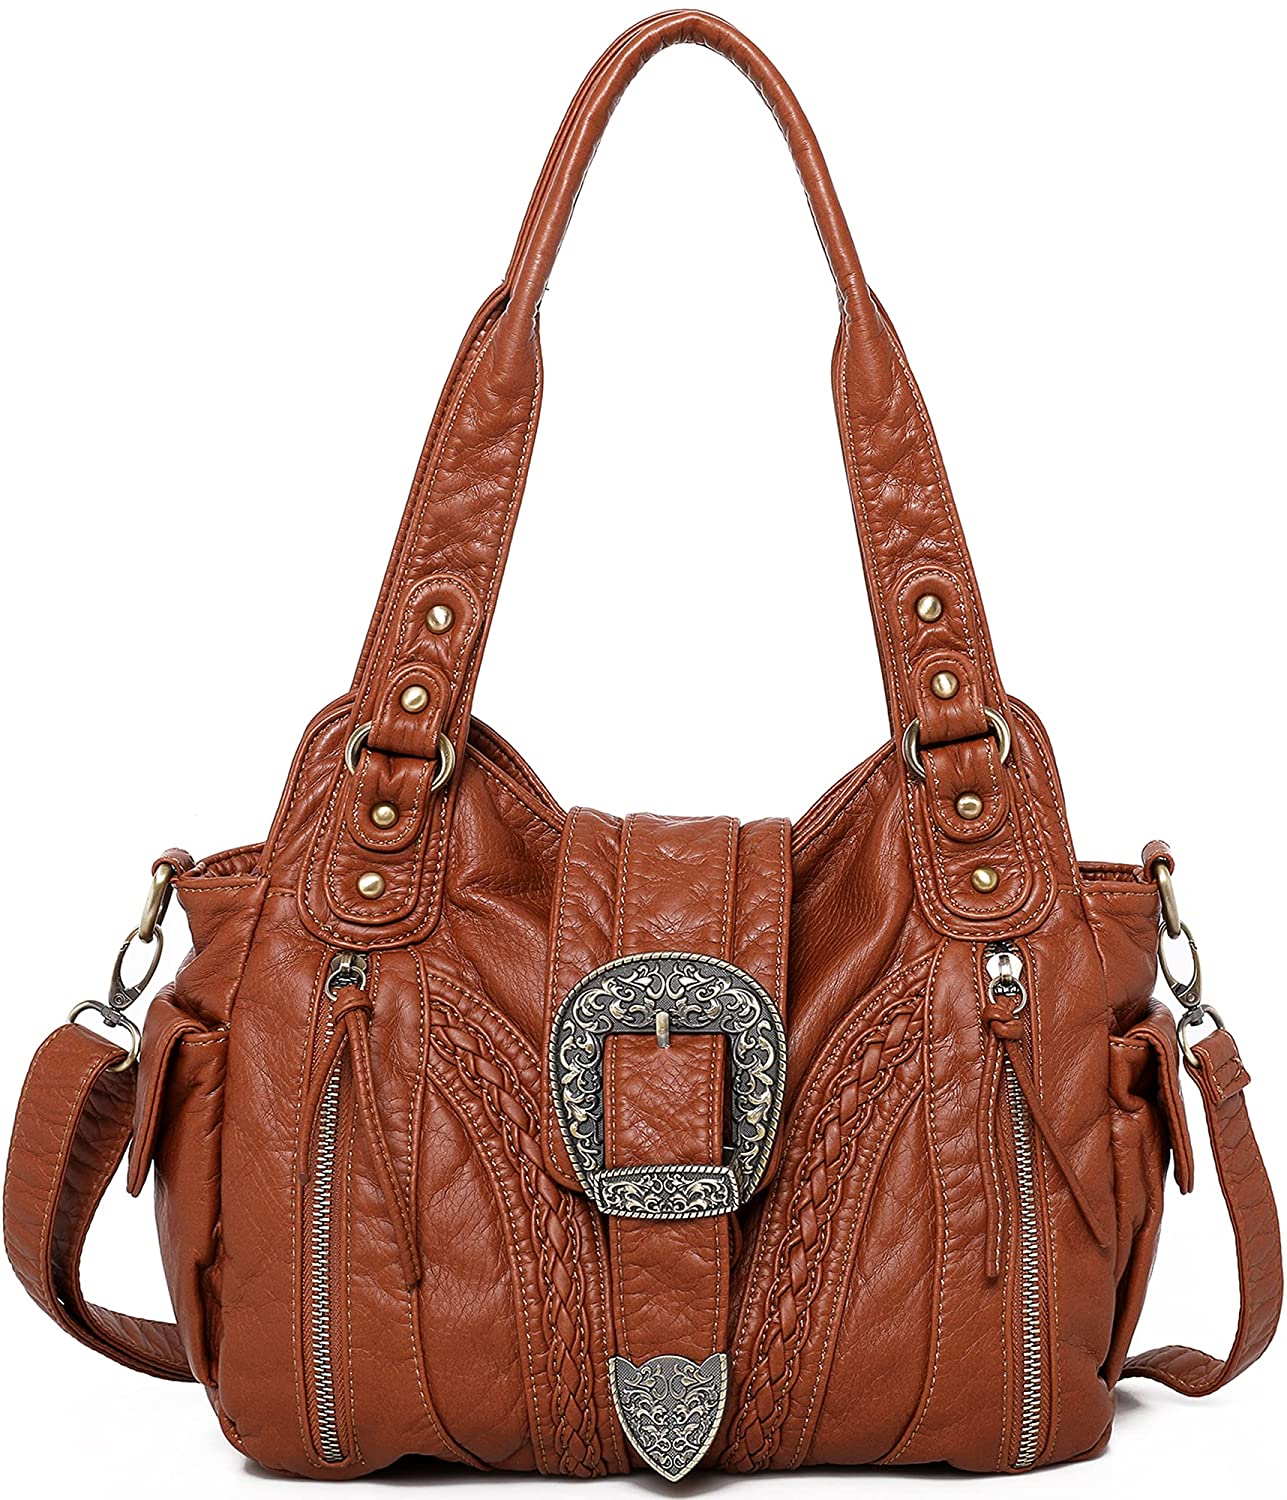 Montana West Shoulder Bag Concealed Carry Purses and Handbags For Women Leather Crossbody Bags 